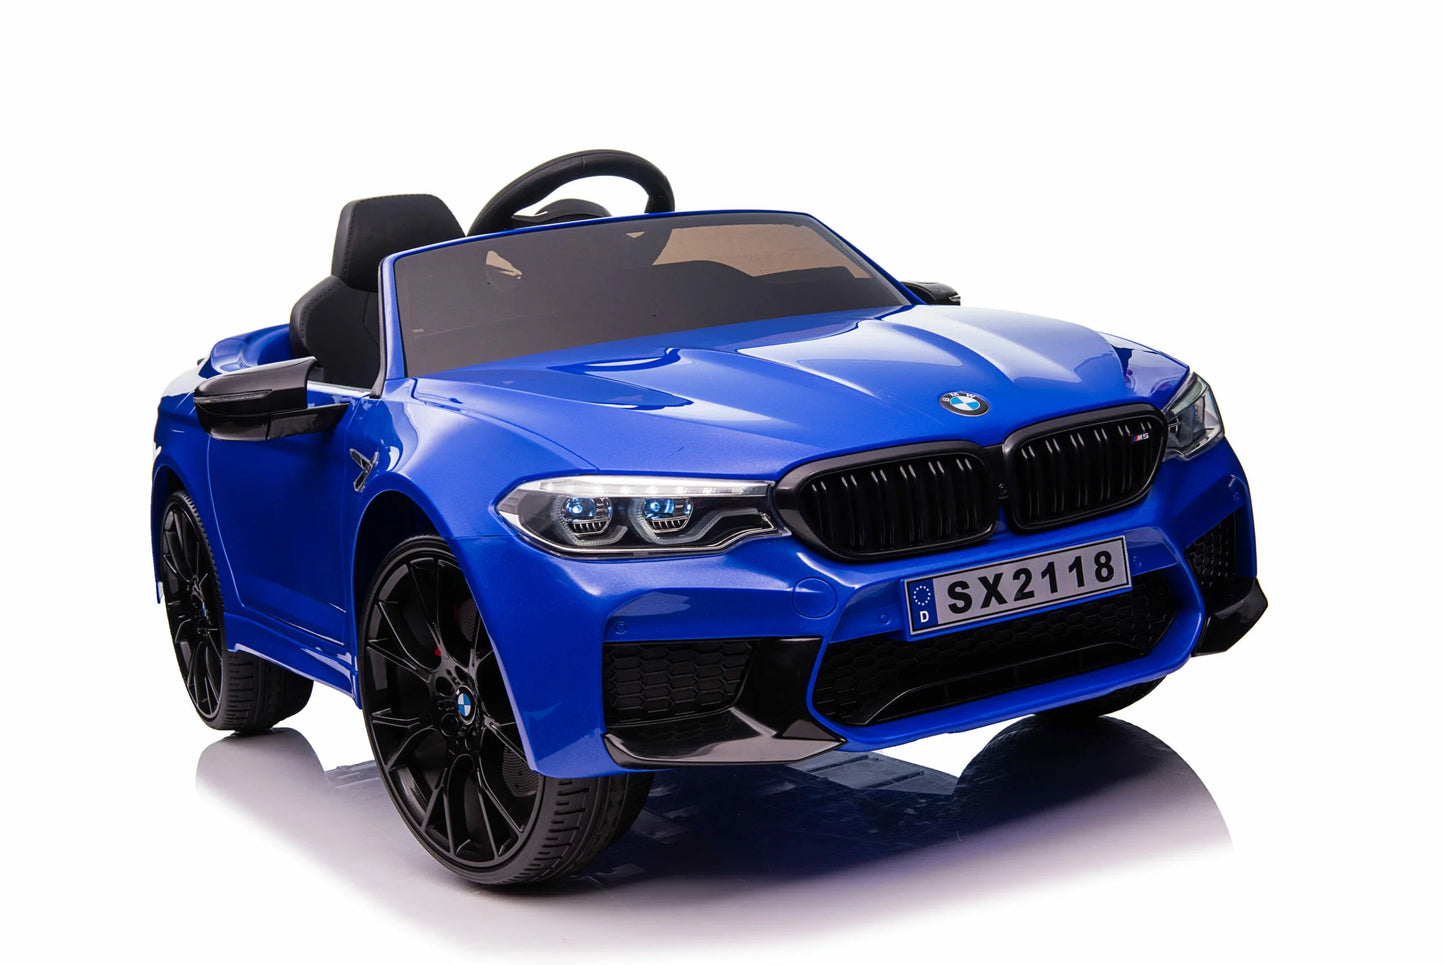 Blue BMW M5 Drift convertible, an electric ride-on toy car for kids on a white background